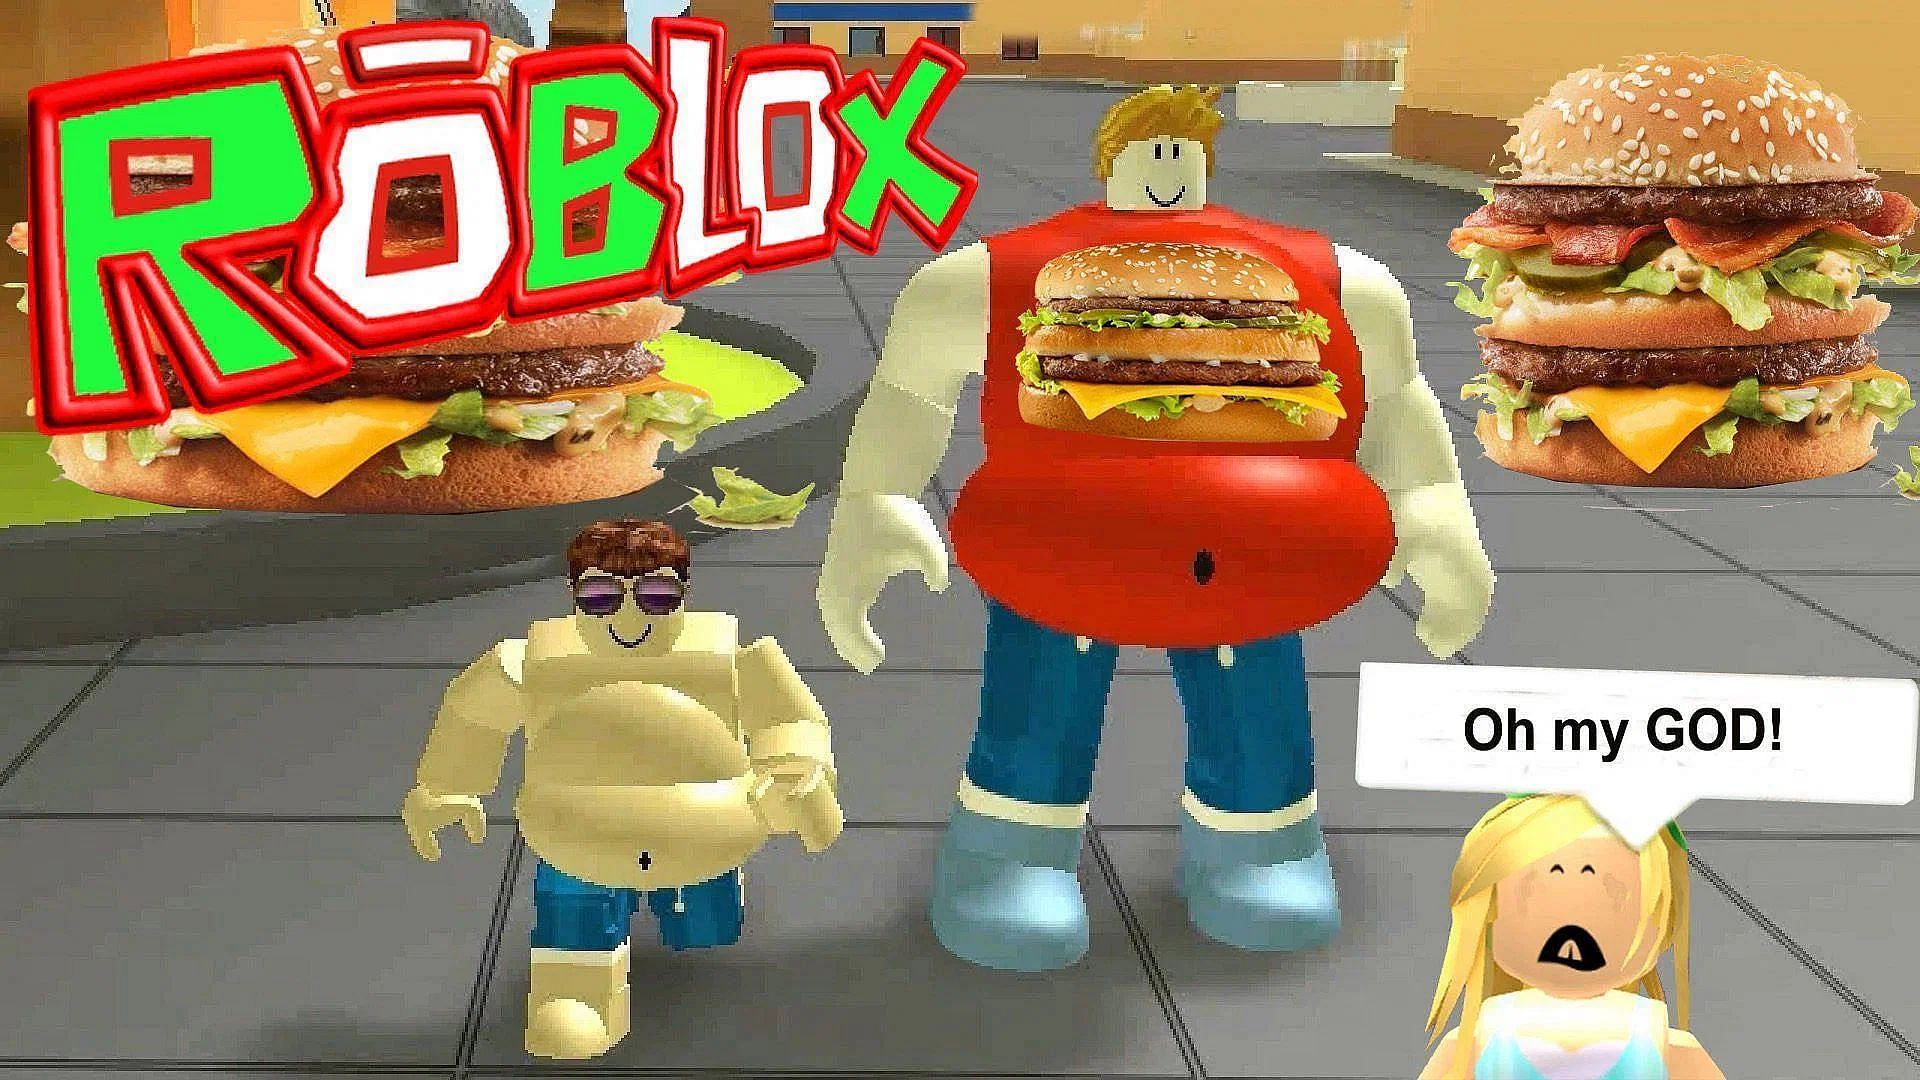 Eat everything you can see (Image via JosephRoblox47/Twitter)